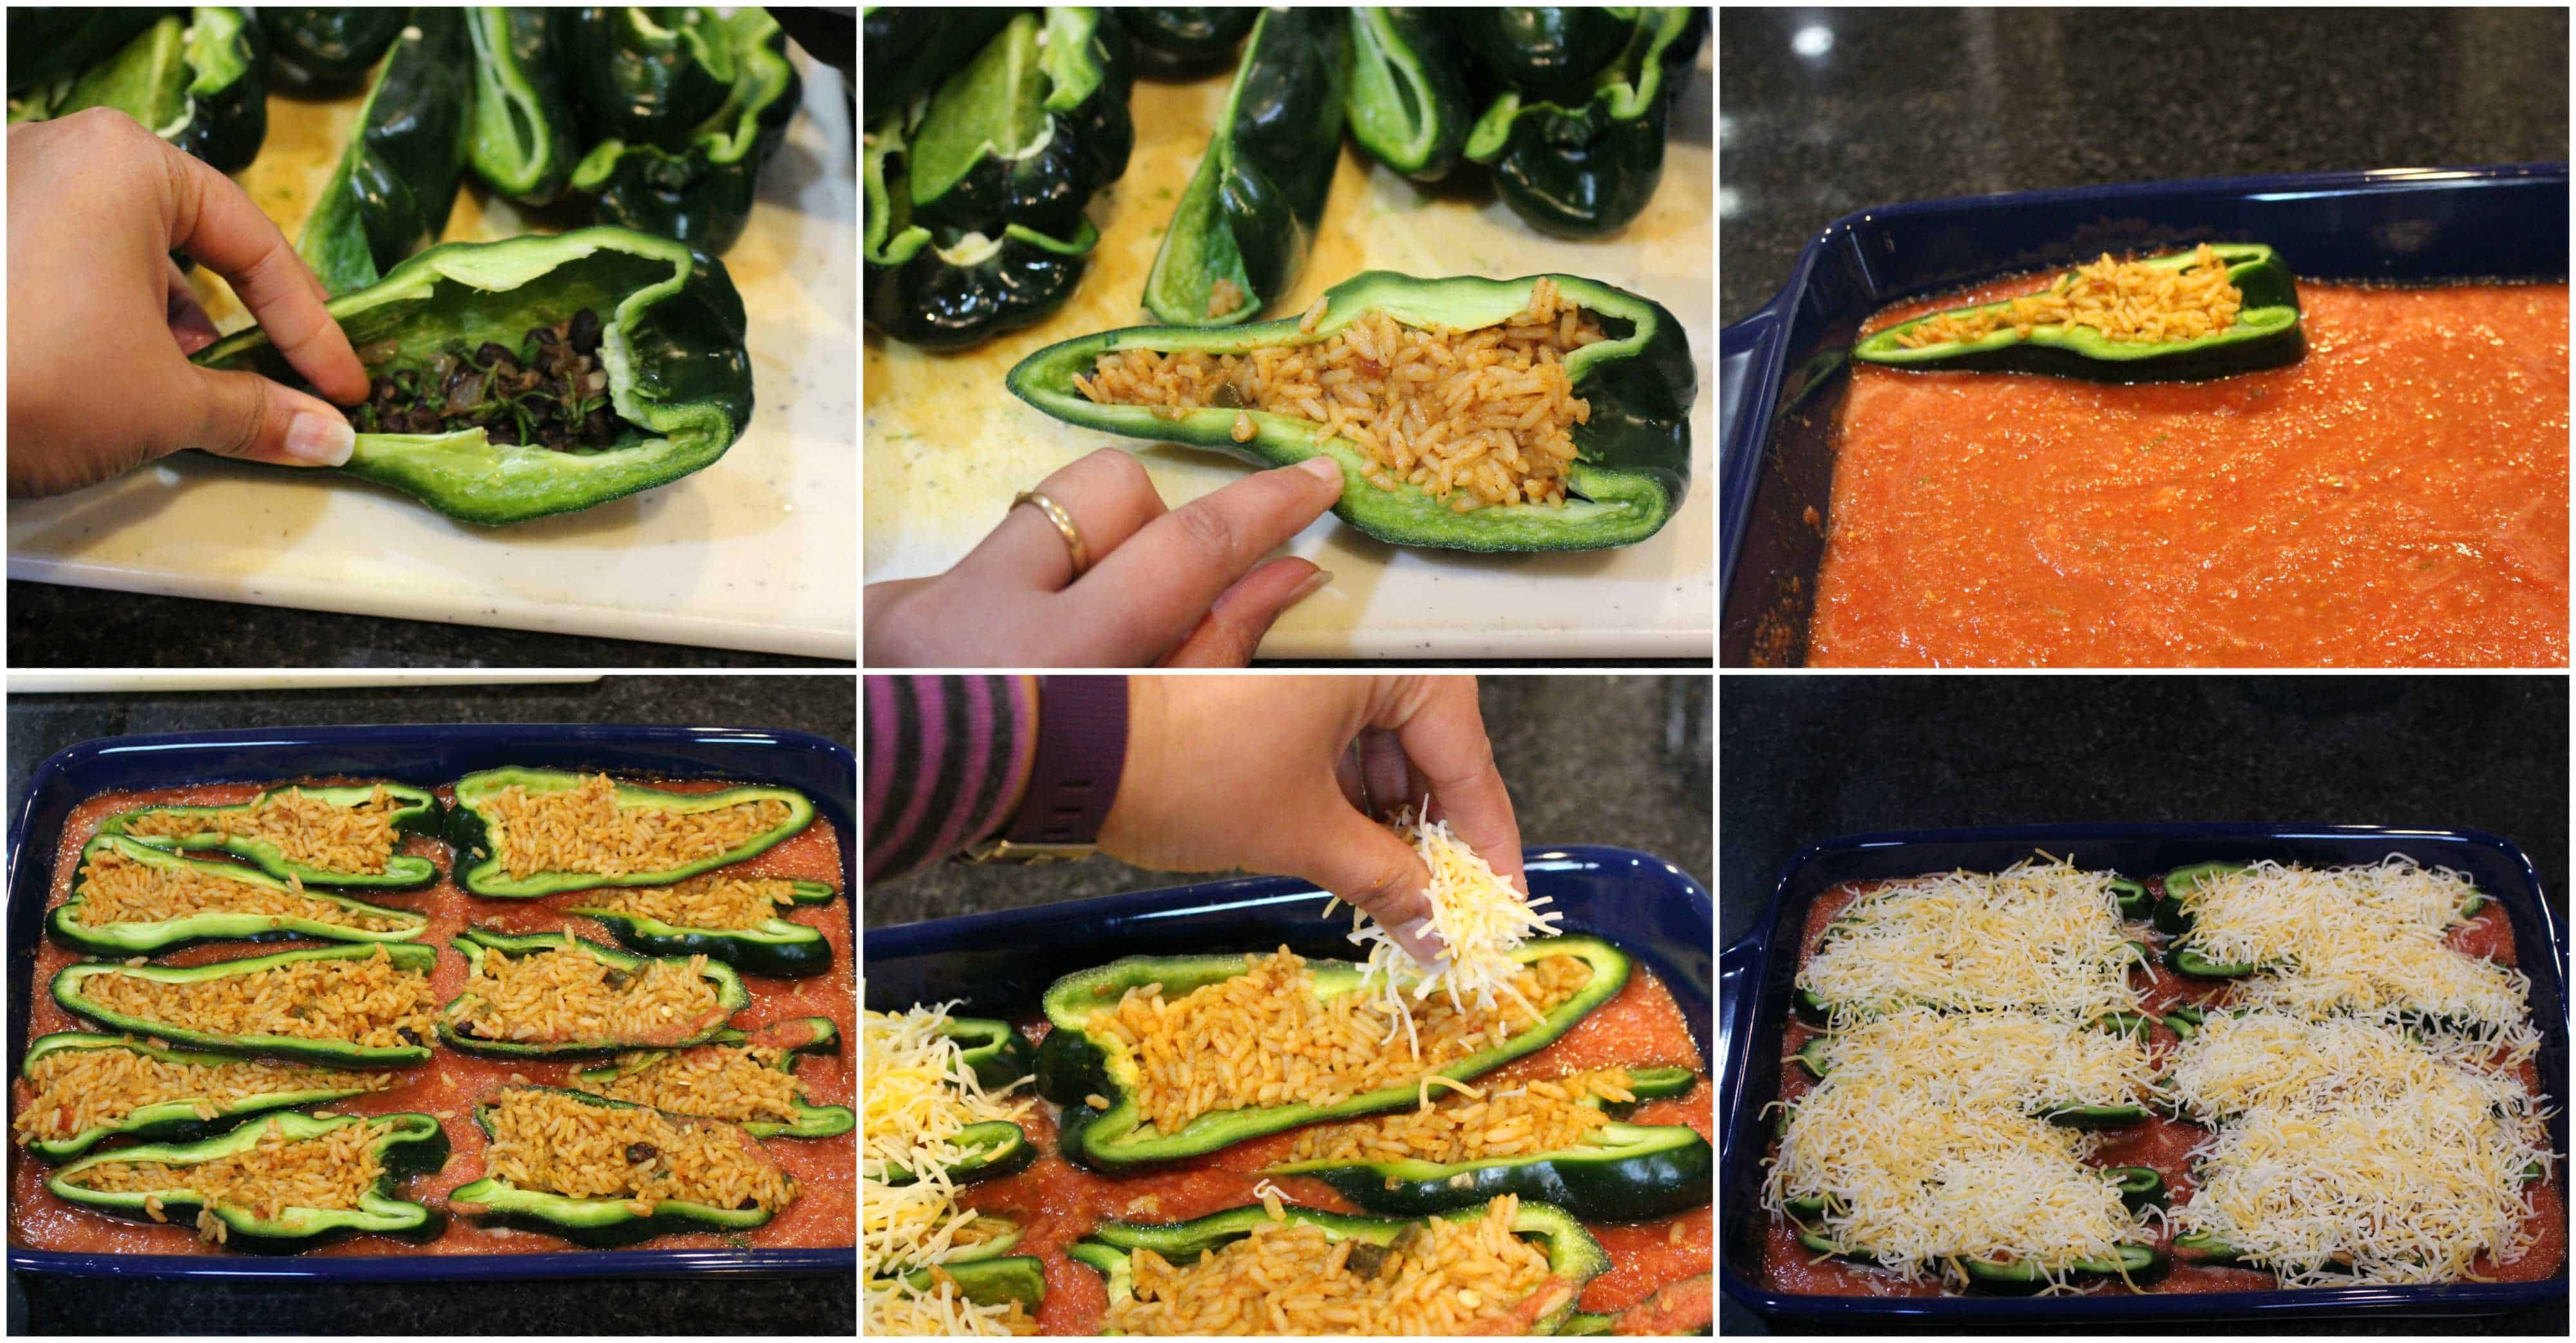 process shots showing how to stuff a poblano pepper